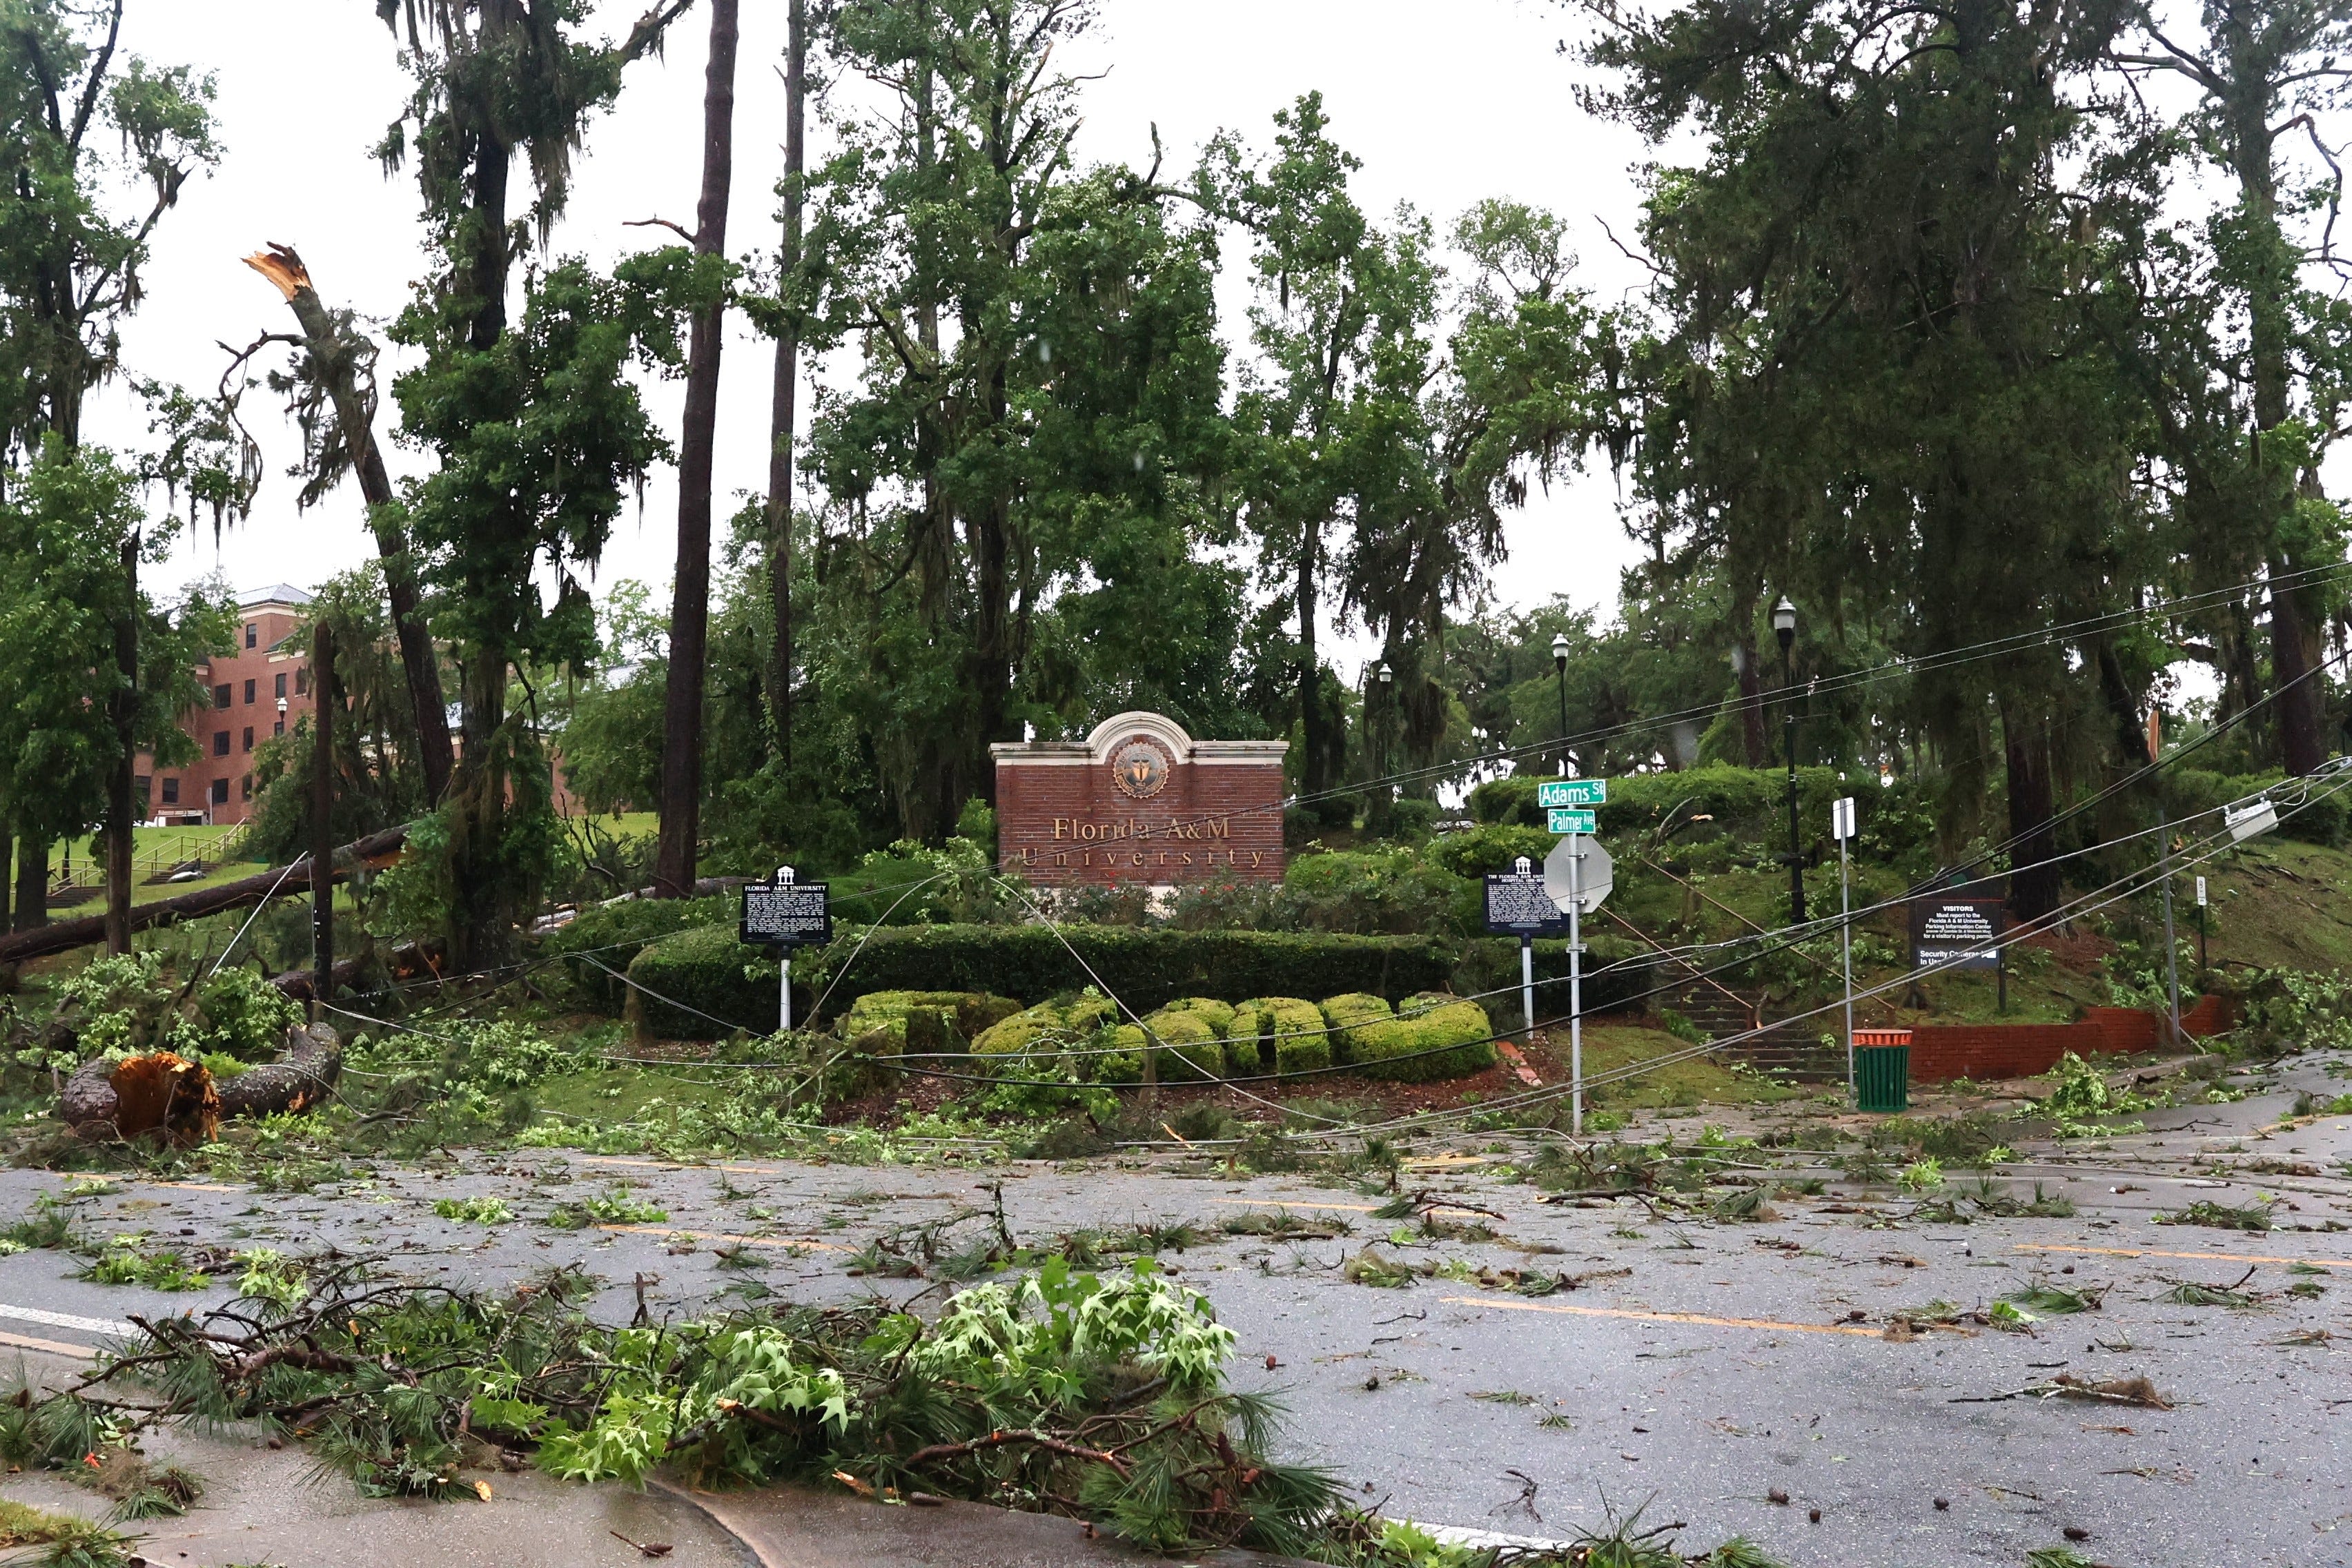 Florida A&M University announces campus closure Tuesday as more storms are expected